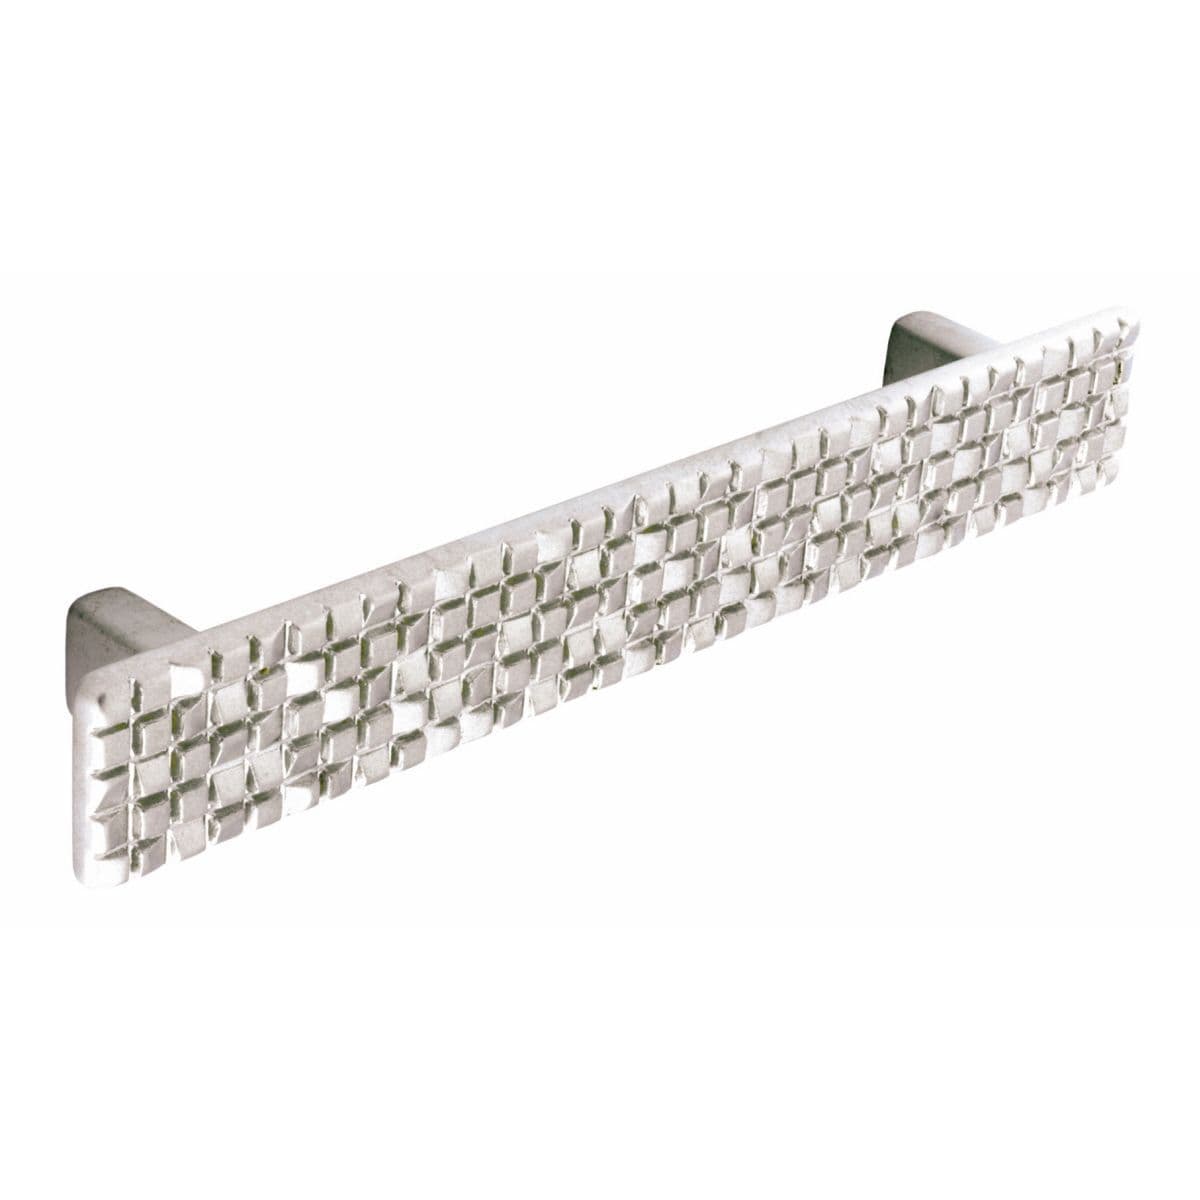 CHELSEA MOSAIC D Cupboard Handle - 128mm h/c size - ANTIQUE NICKEL finish (PWS H420.128.DN)